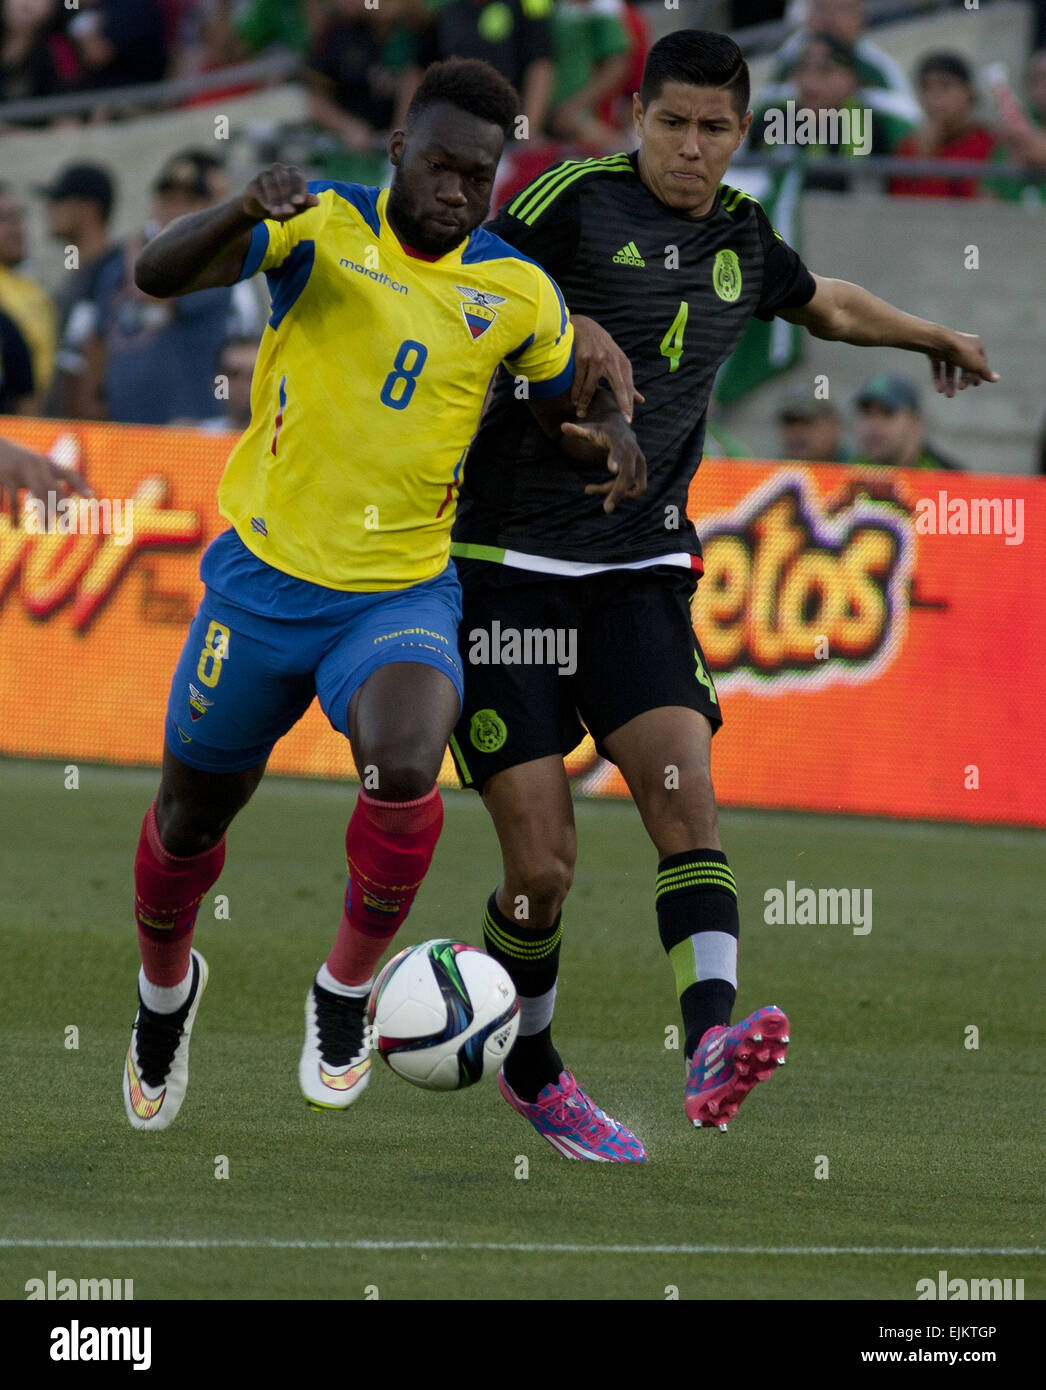 Los Angeles, CALIFORNIA, UNITED STATES OF AMERICA, USA. 28th Mar, 2015. Mexican player (4) Hugo Ayala fights for the ball with Ecuadorian player Felipe Caicedo during thee first half of their game at the Los Angeles Memorial Coliseum for the friendly game today Saturday 28 March 2015.ARMANDO ARORIZO © Armando Arorizo/Prensa Internacional/ZUMA Wire/Alamy Live News Stock Photo